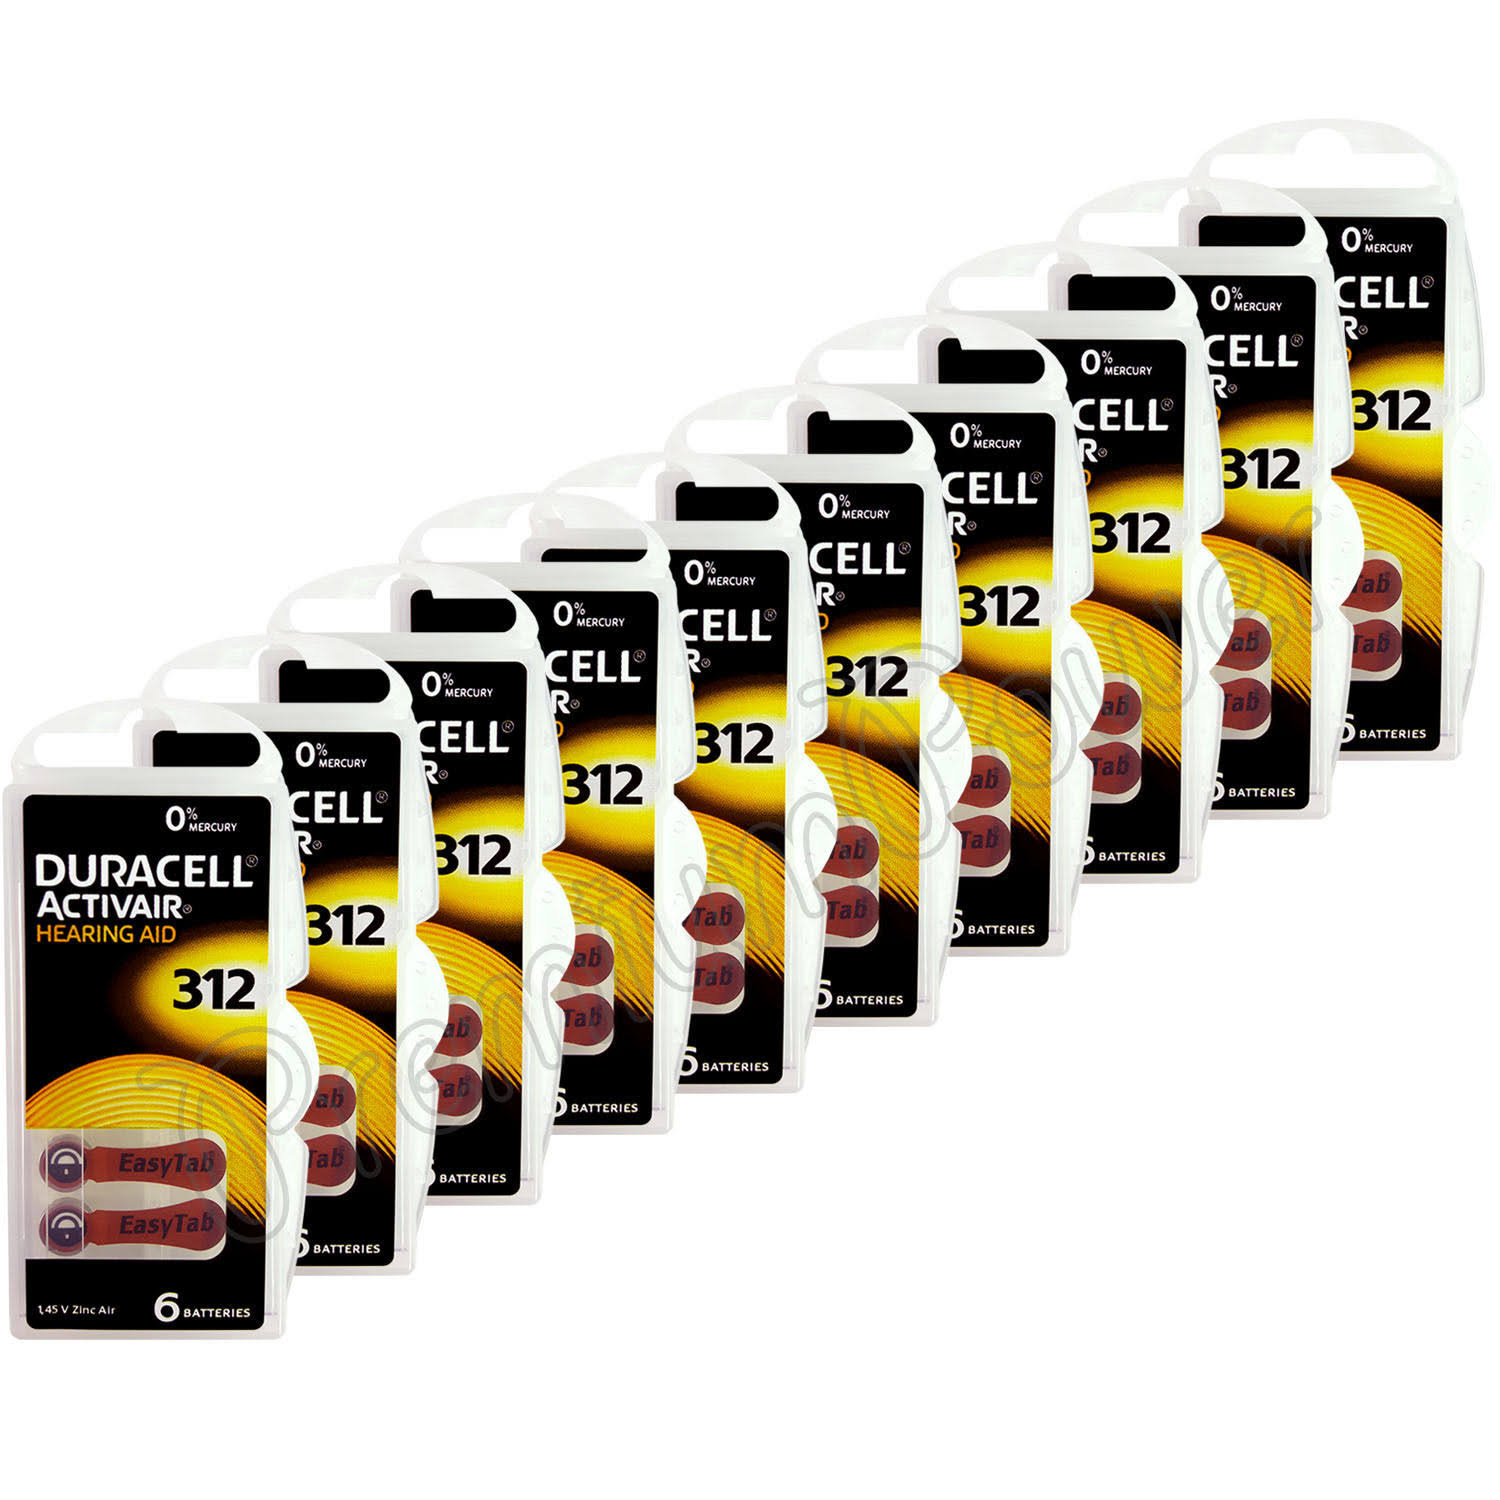 Duracell ActivAir Hearing Aid Battery - Size 312, 6 Pack